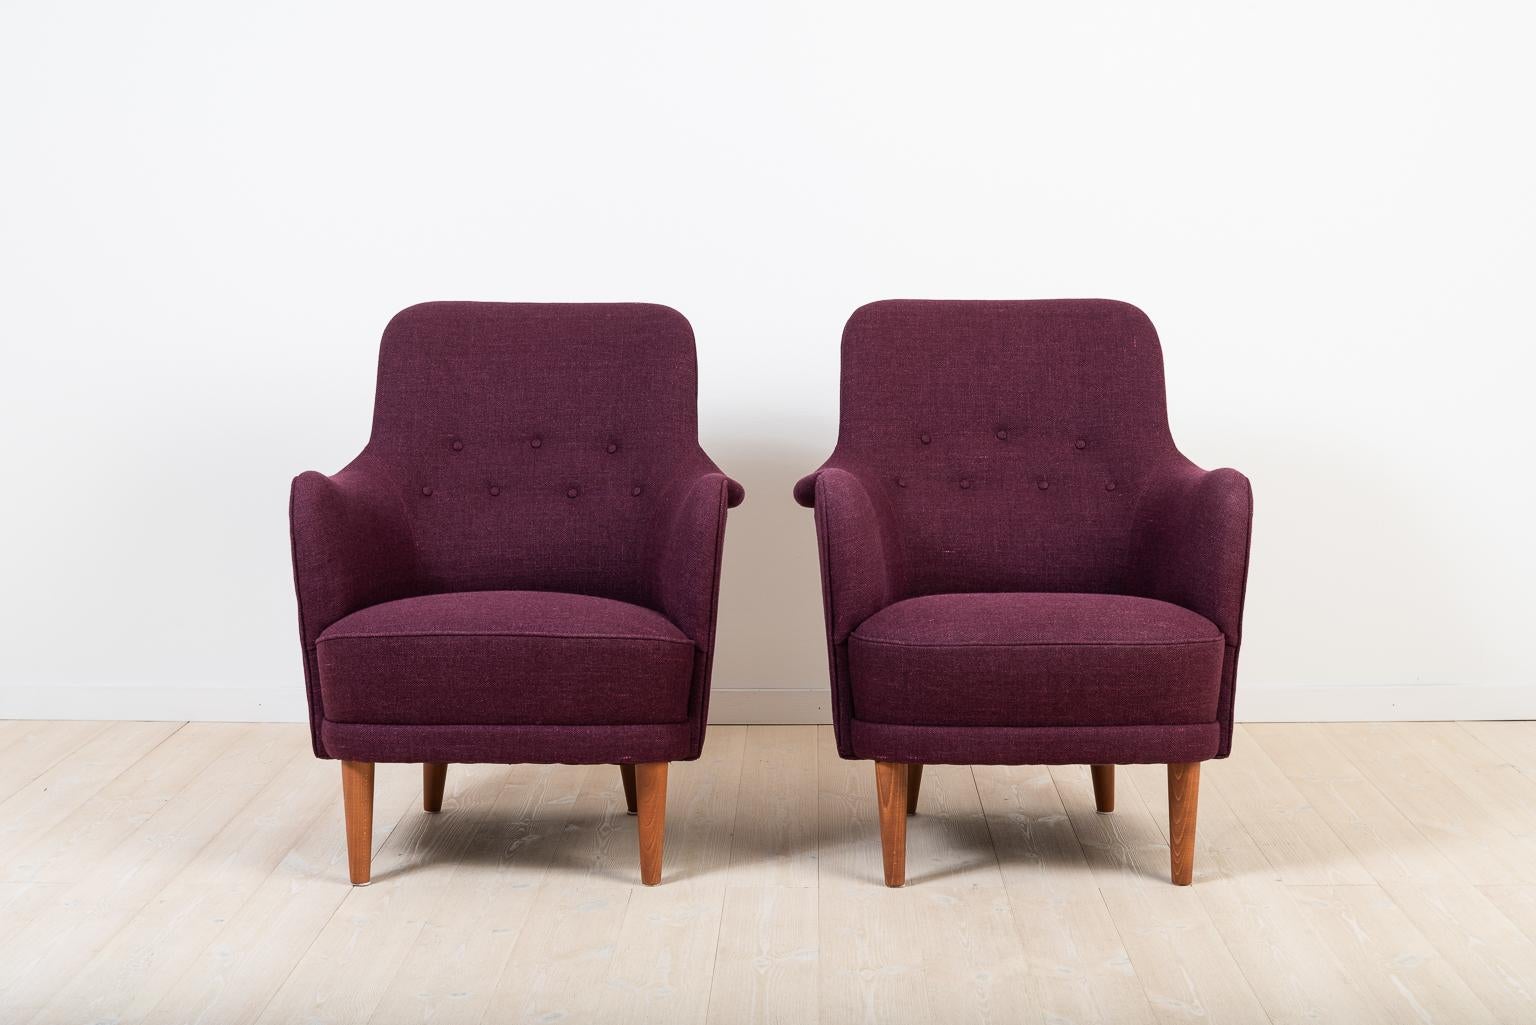 A pair of armchairs “Samsas” designed by Carl Malmsten. Manufactured by AB O.H Sjögren, Tranås, Sweden 

The model Samsas is a redesigned version of “Konsert” that Carl Malmsten designed for Stockholm Konserthus in 1923. The model “Samsas” was